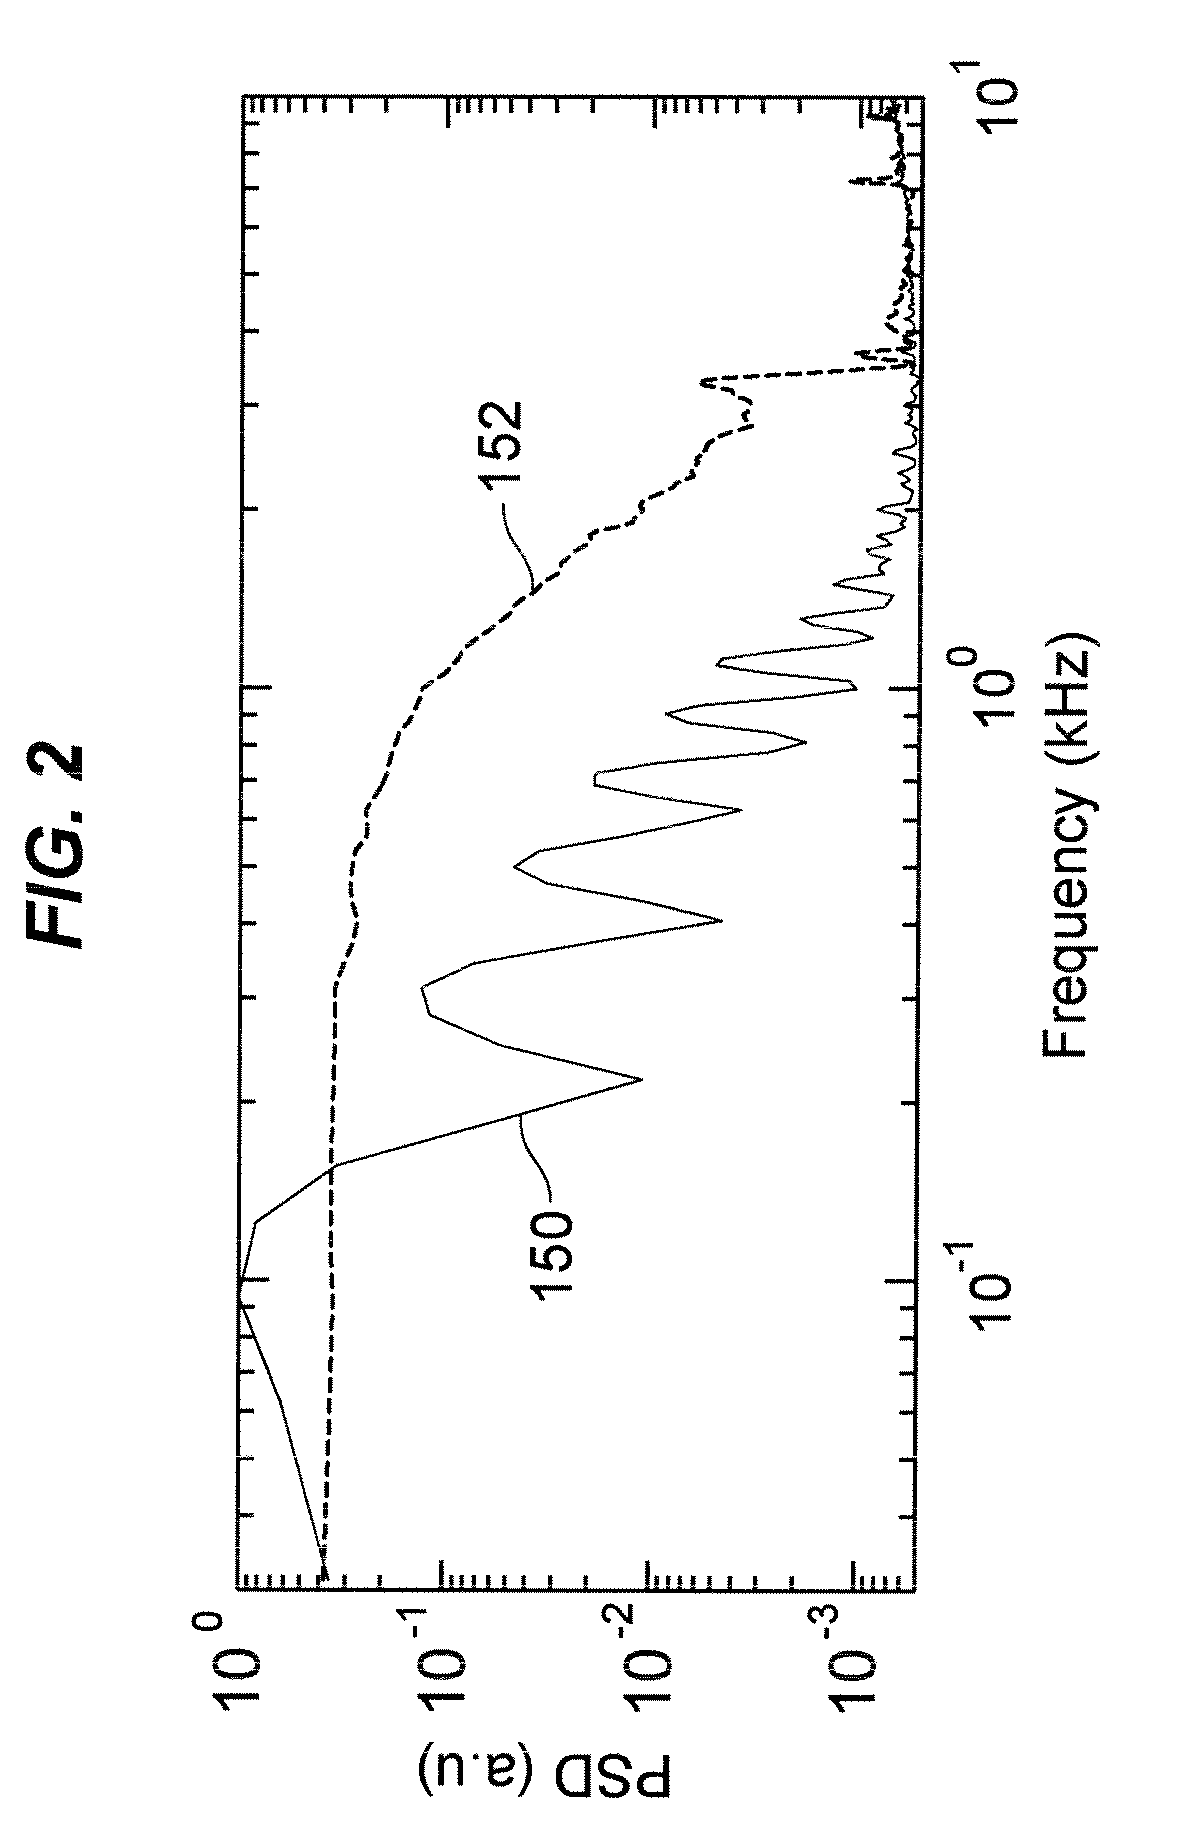 Stochastic Scanning Apparatus Using Multiphoton Multifocal Source